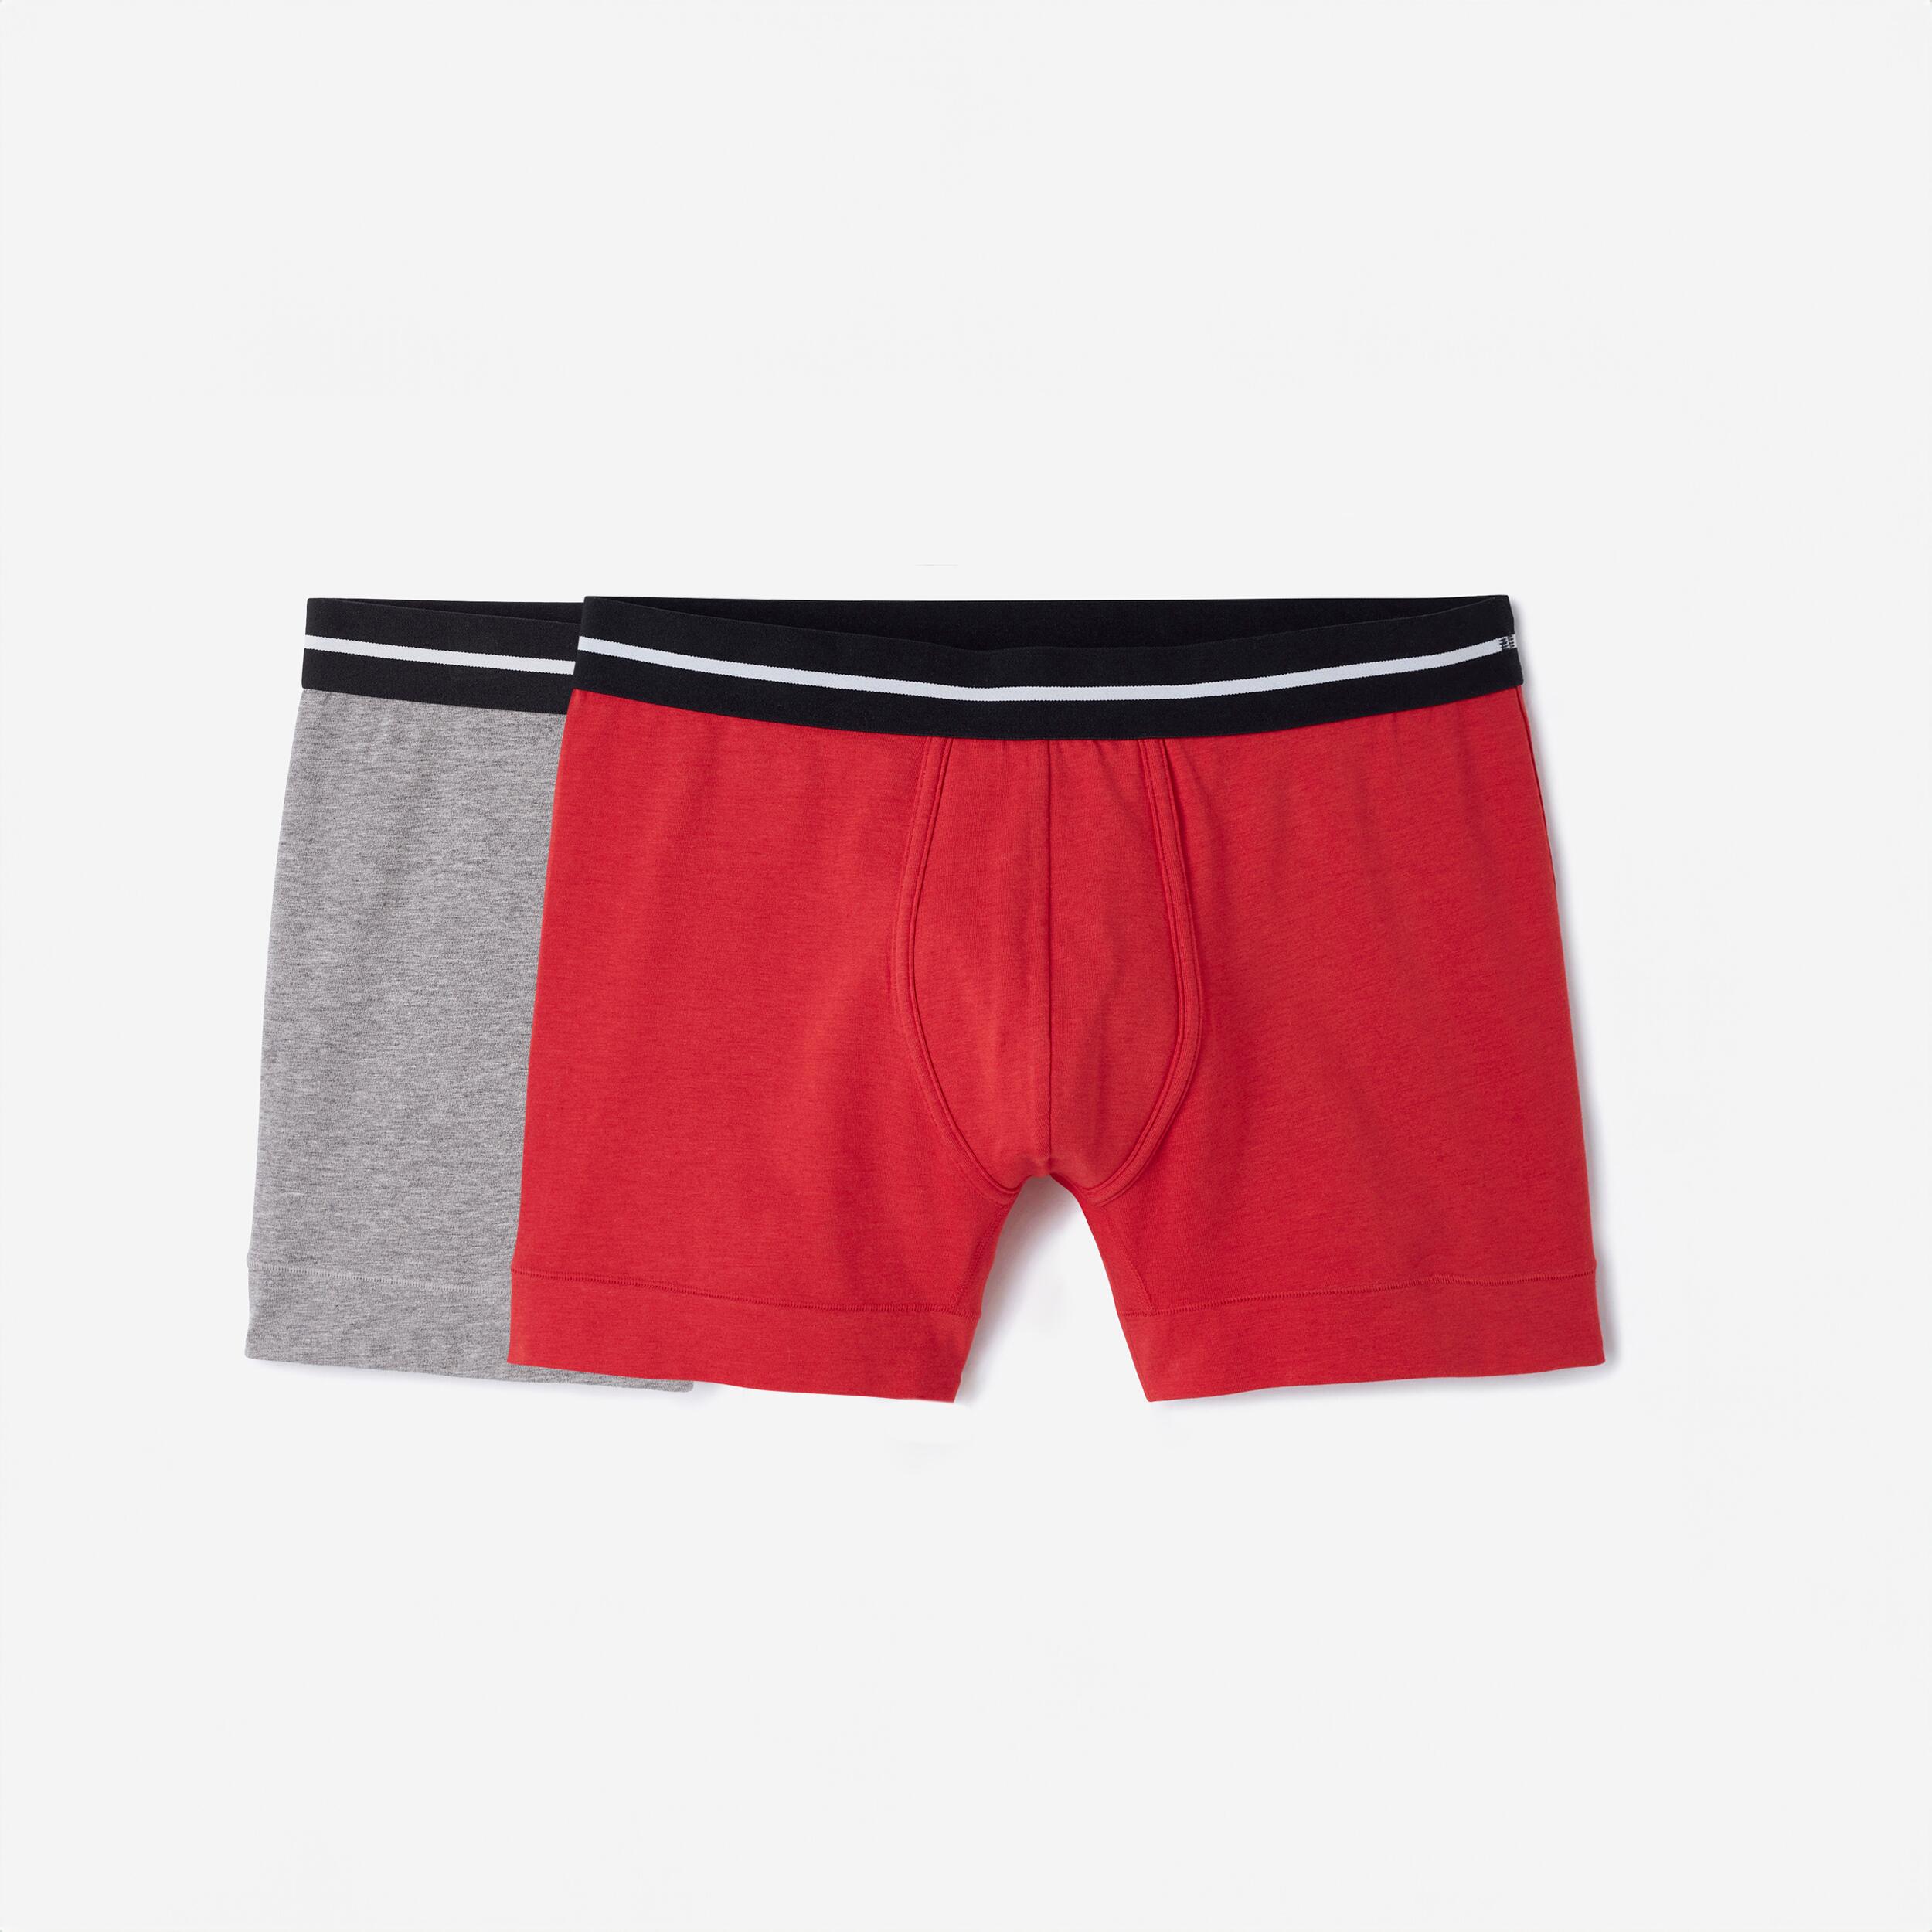 Men's Cotton Boxers Twin-Pack - Grey/Red 1/9